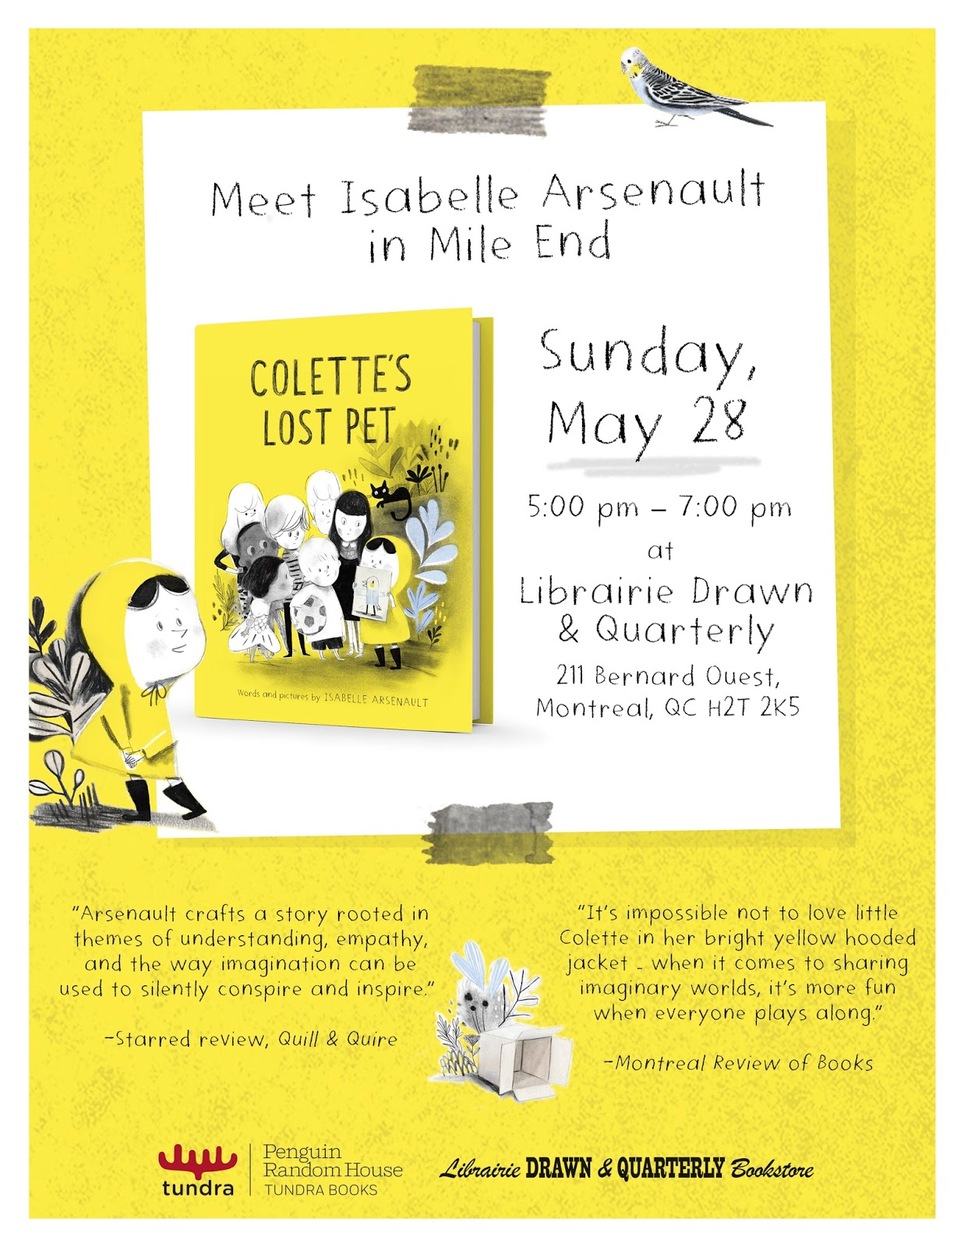 Today, May 28th, 2017: Isabelle Arsenault's 5 à 7 at Librairie D+Q!